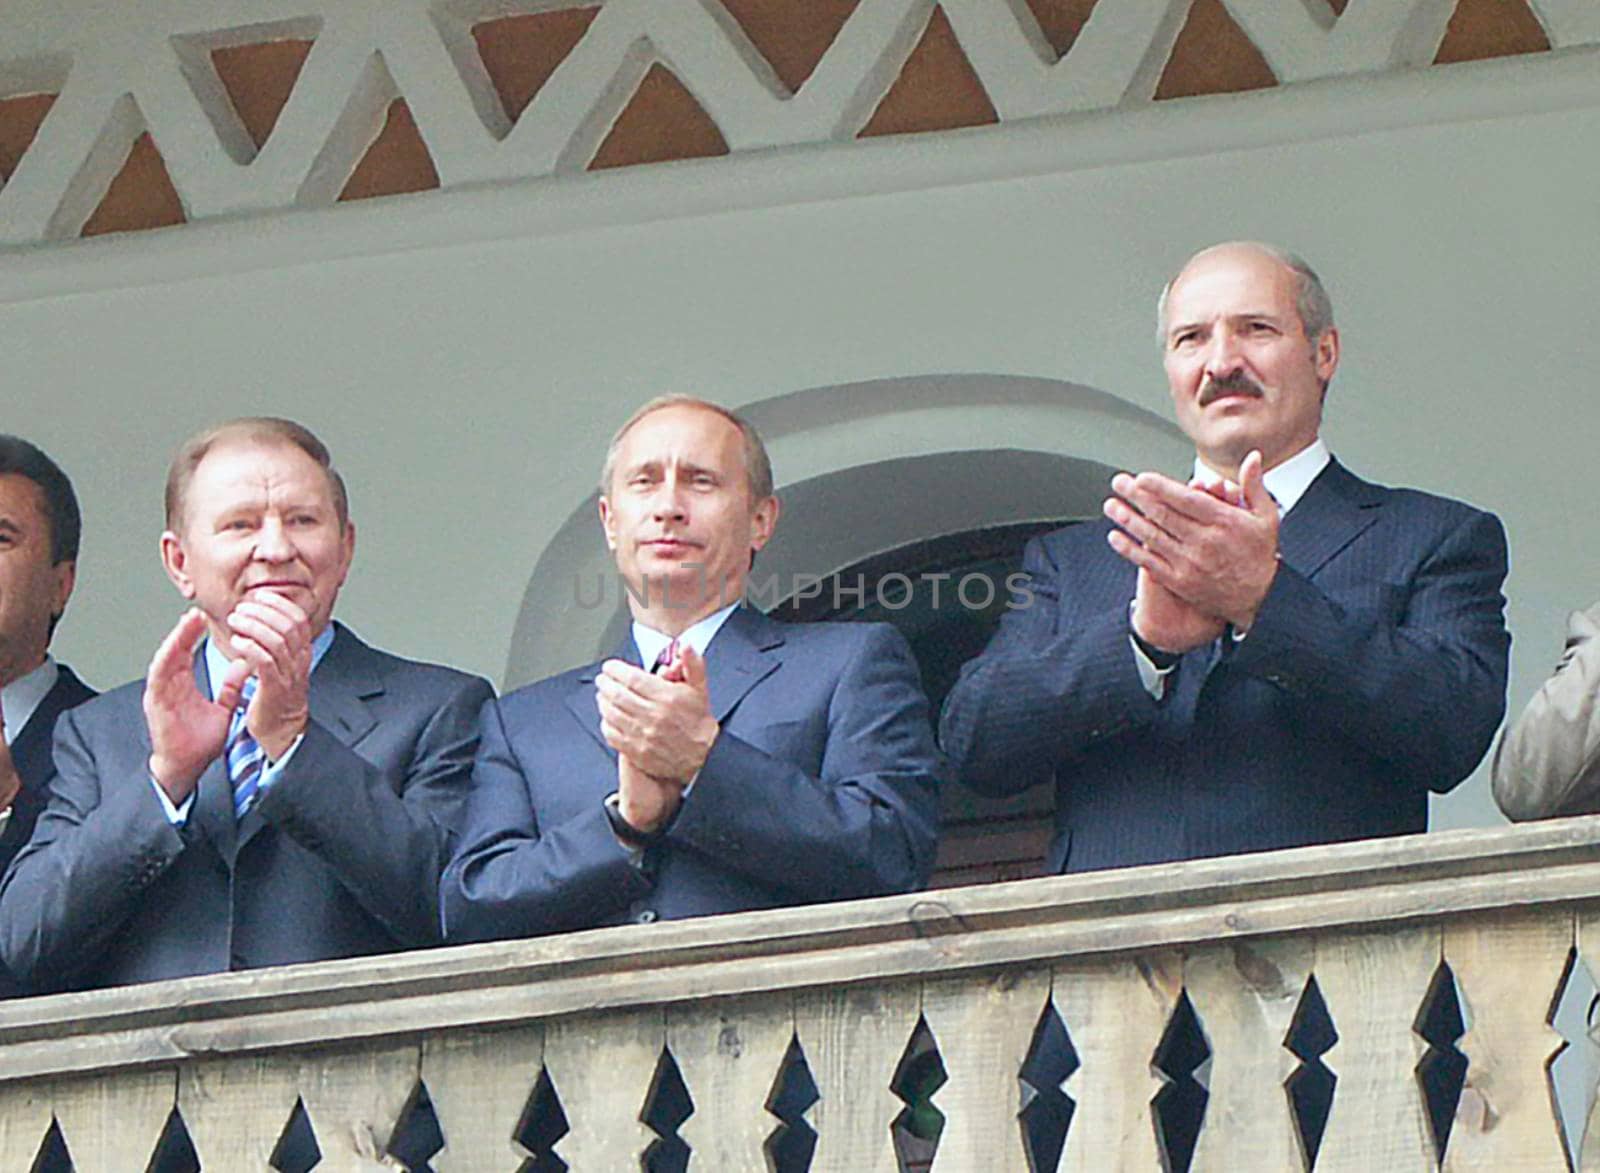 Historical photo of the presidents. Photo of the three presidents of Ukraine, Russia and Belarus. Kuchma Putin and Lukashenko in the photo. Ukrainian Russian and Belarusian presidents during a meeting